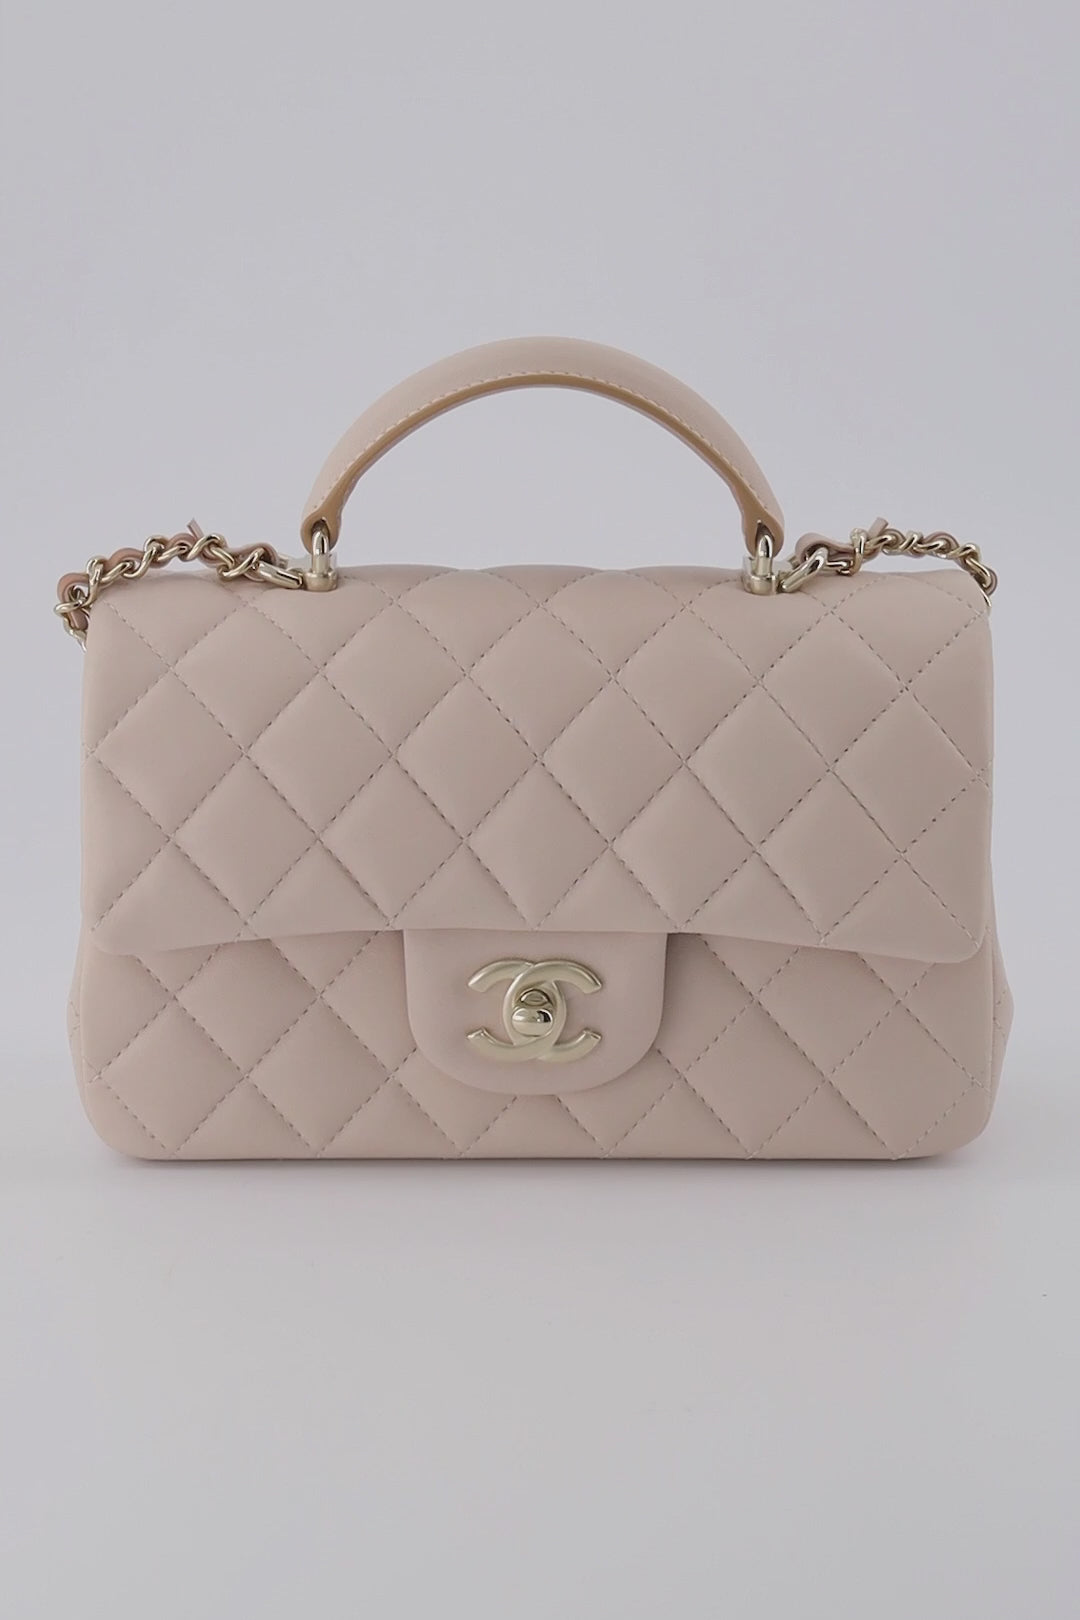 chanel mini flap bag with top handle 2021